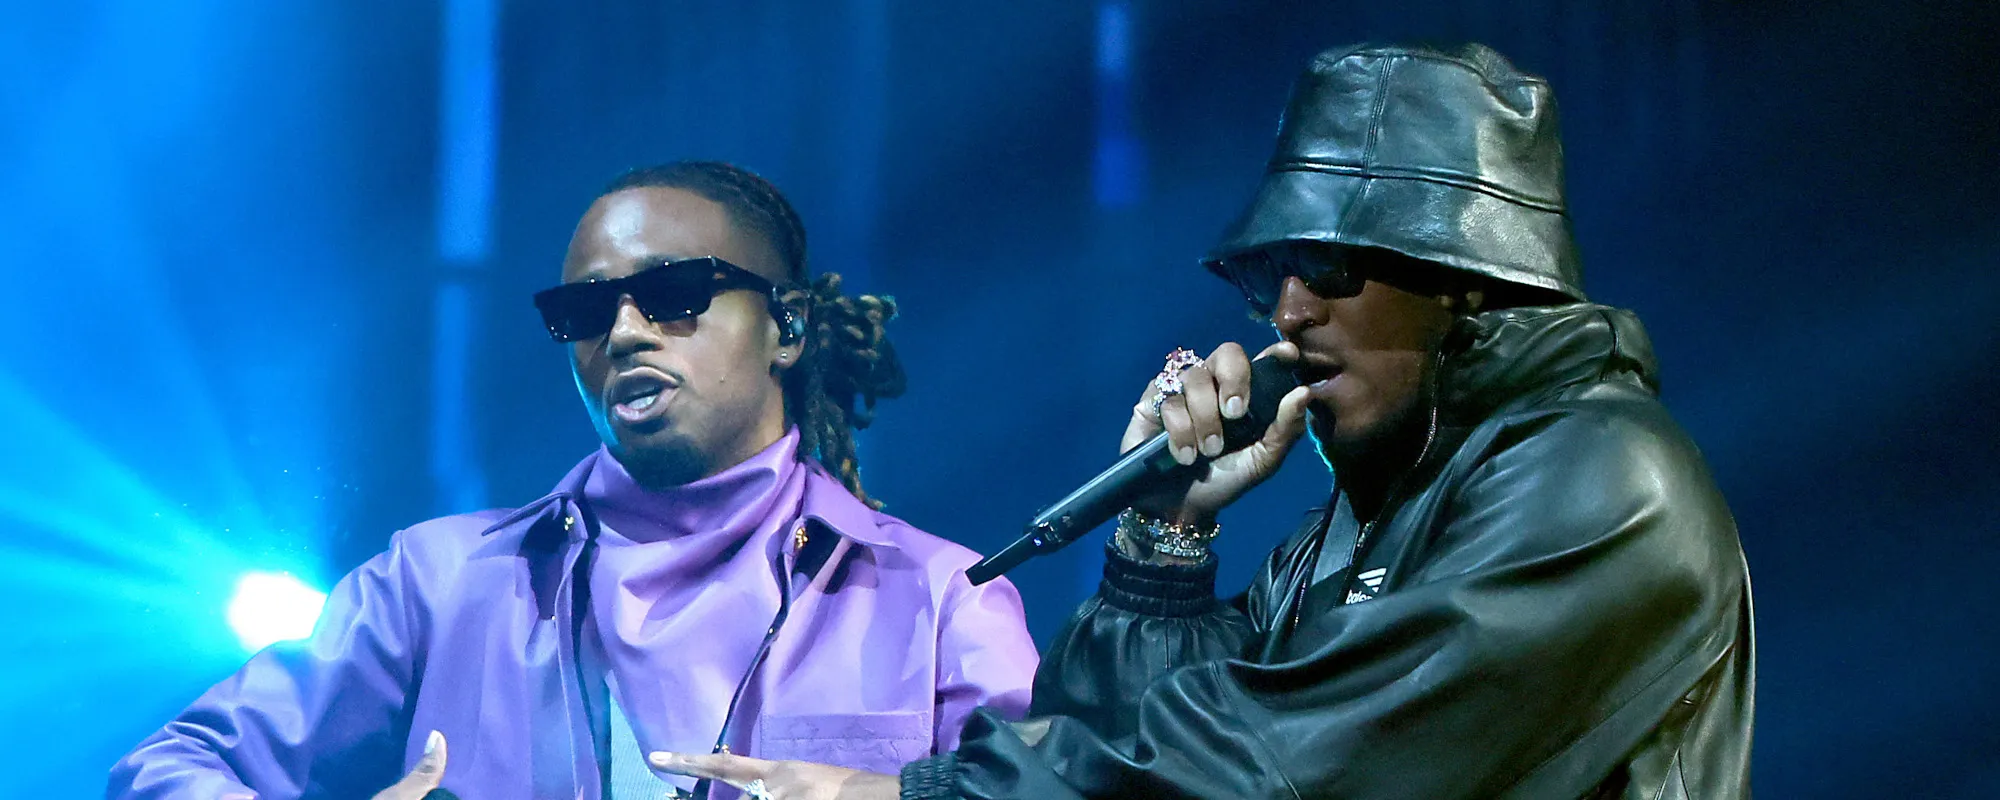 The Meaning Behind “Like That” by Future, Metro Boomin, and Kendrick Lamar and the Rap Rivalry It References